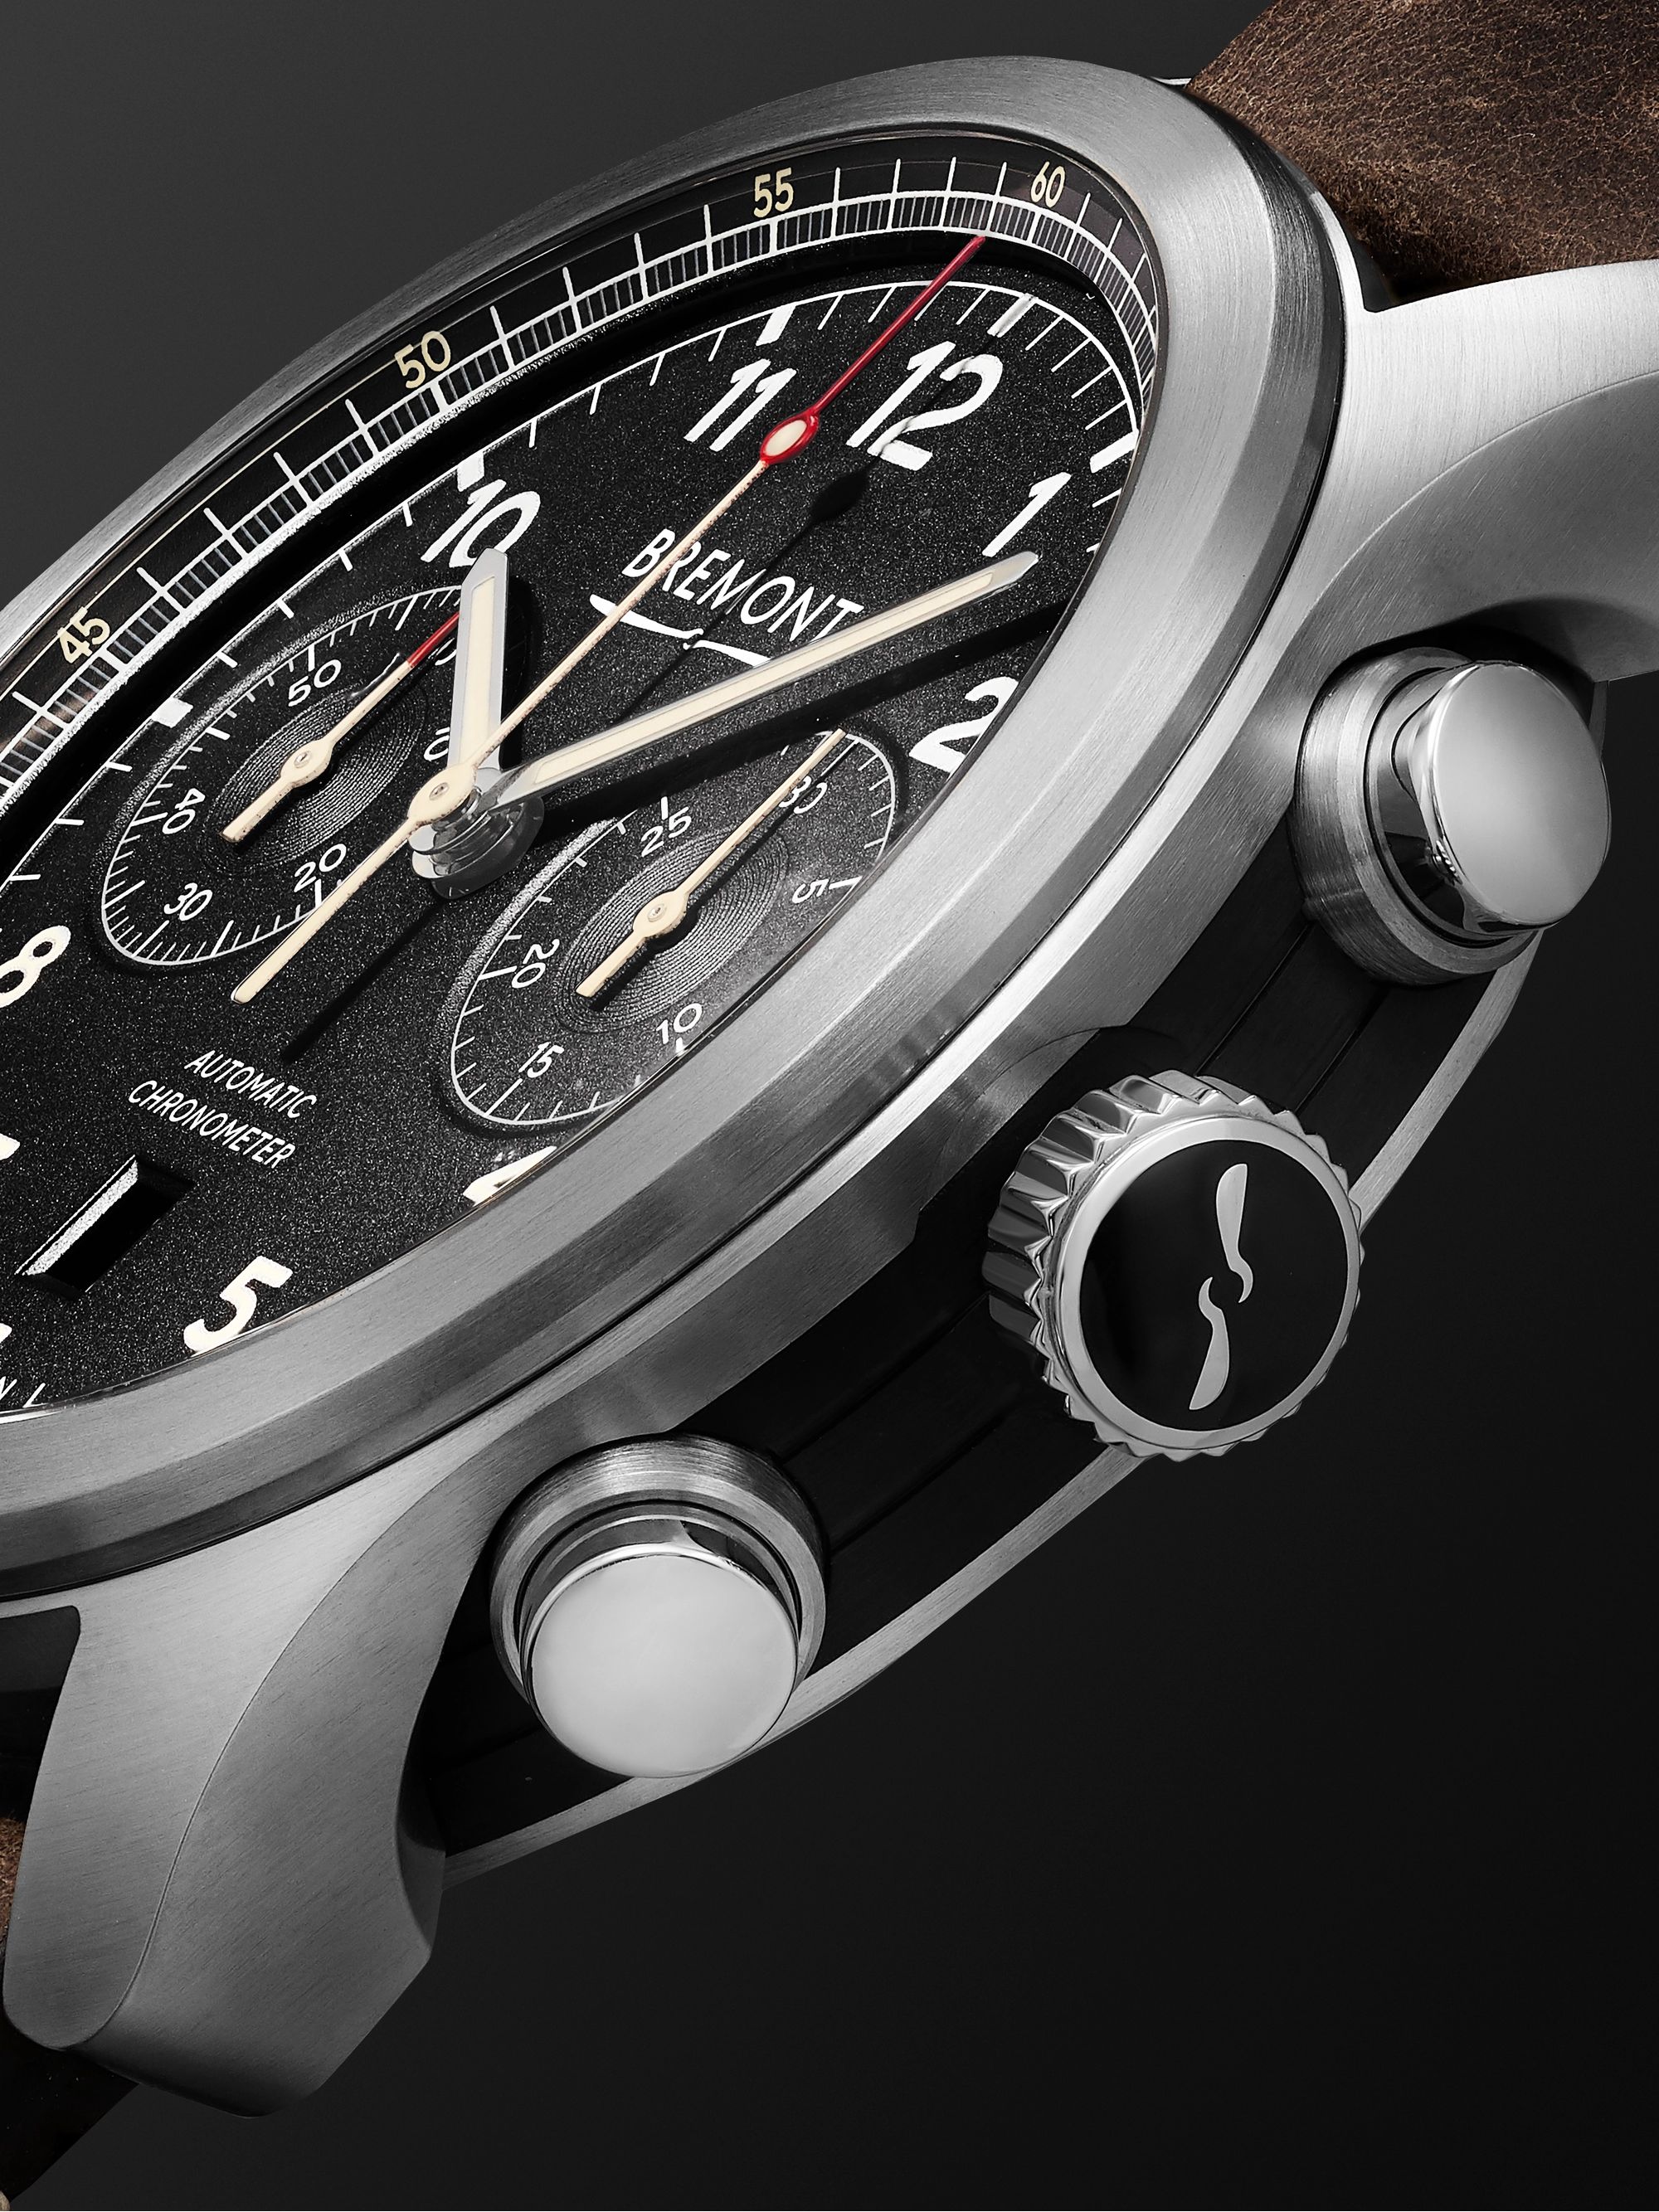 BREMONT ALT1-C Griffon Automatic Chronograph 43mm Stainless Steel and Leather Watch, Ref. No. ALT1-C-GRIFFON-R-S